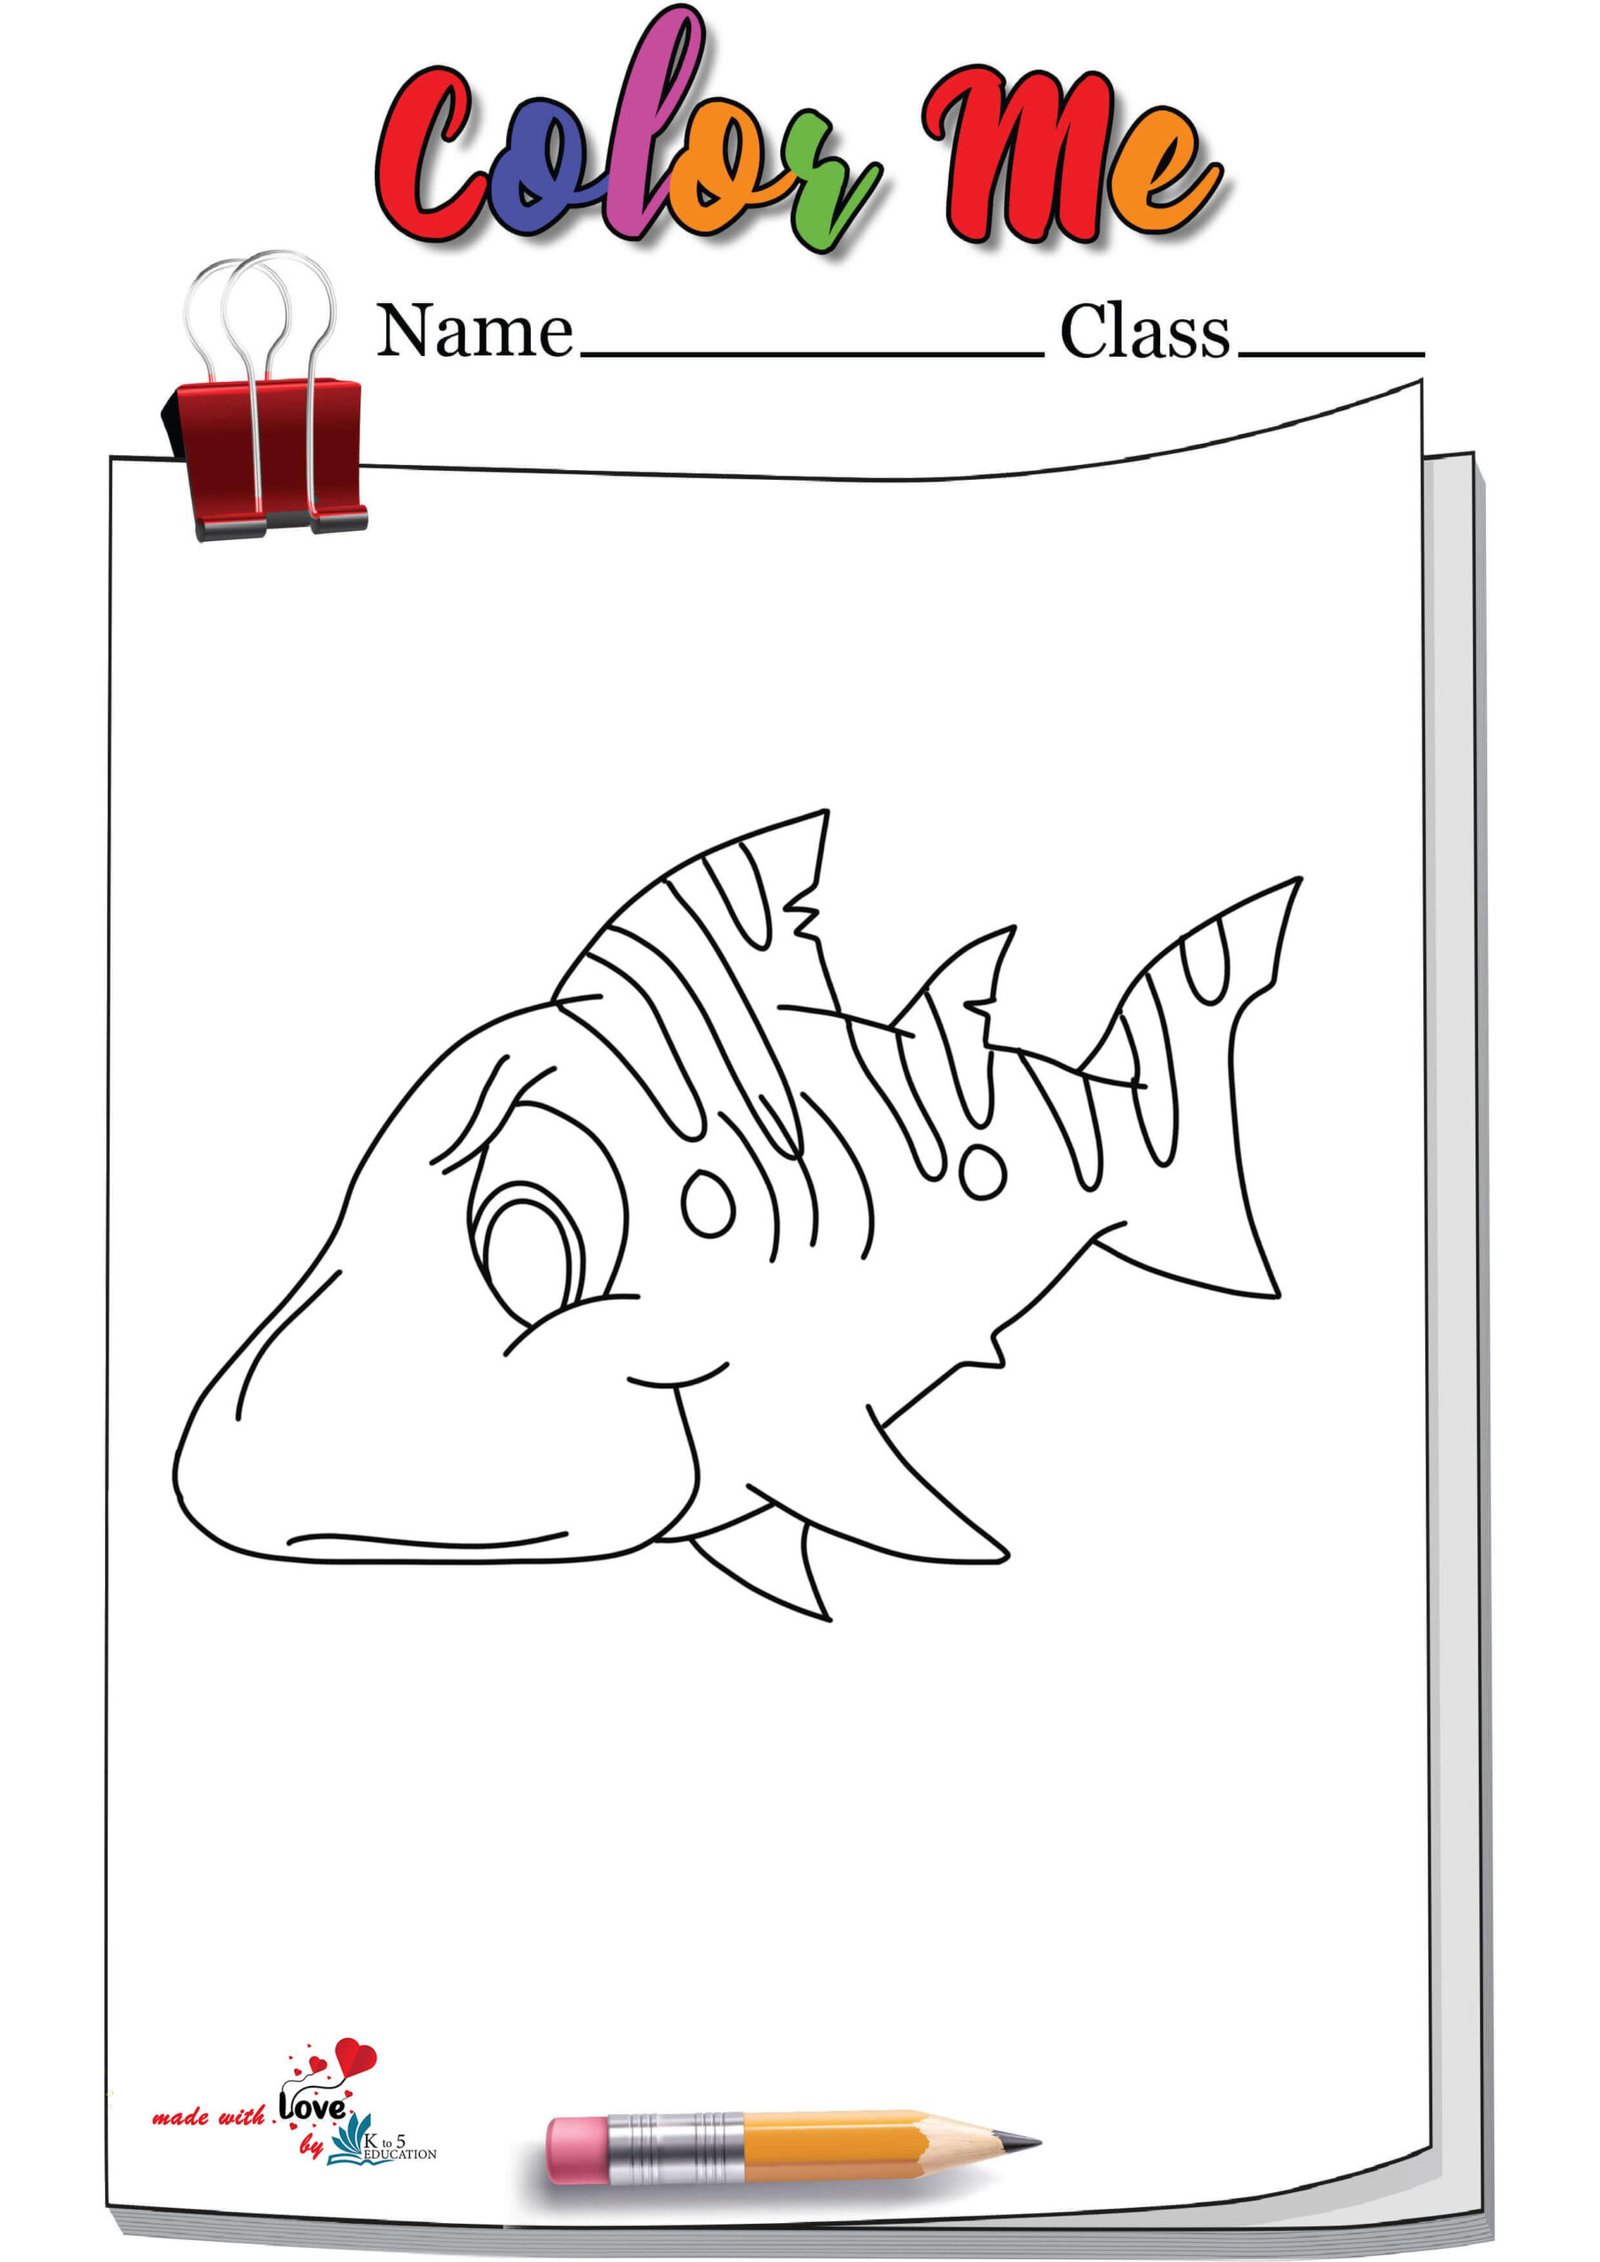 Coloring Page Of A Shark